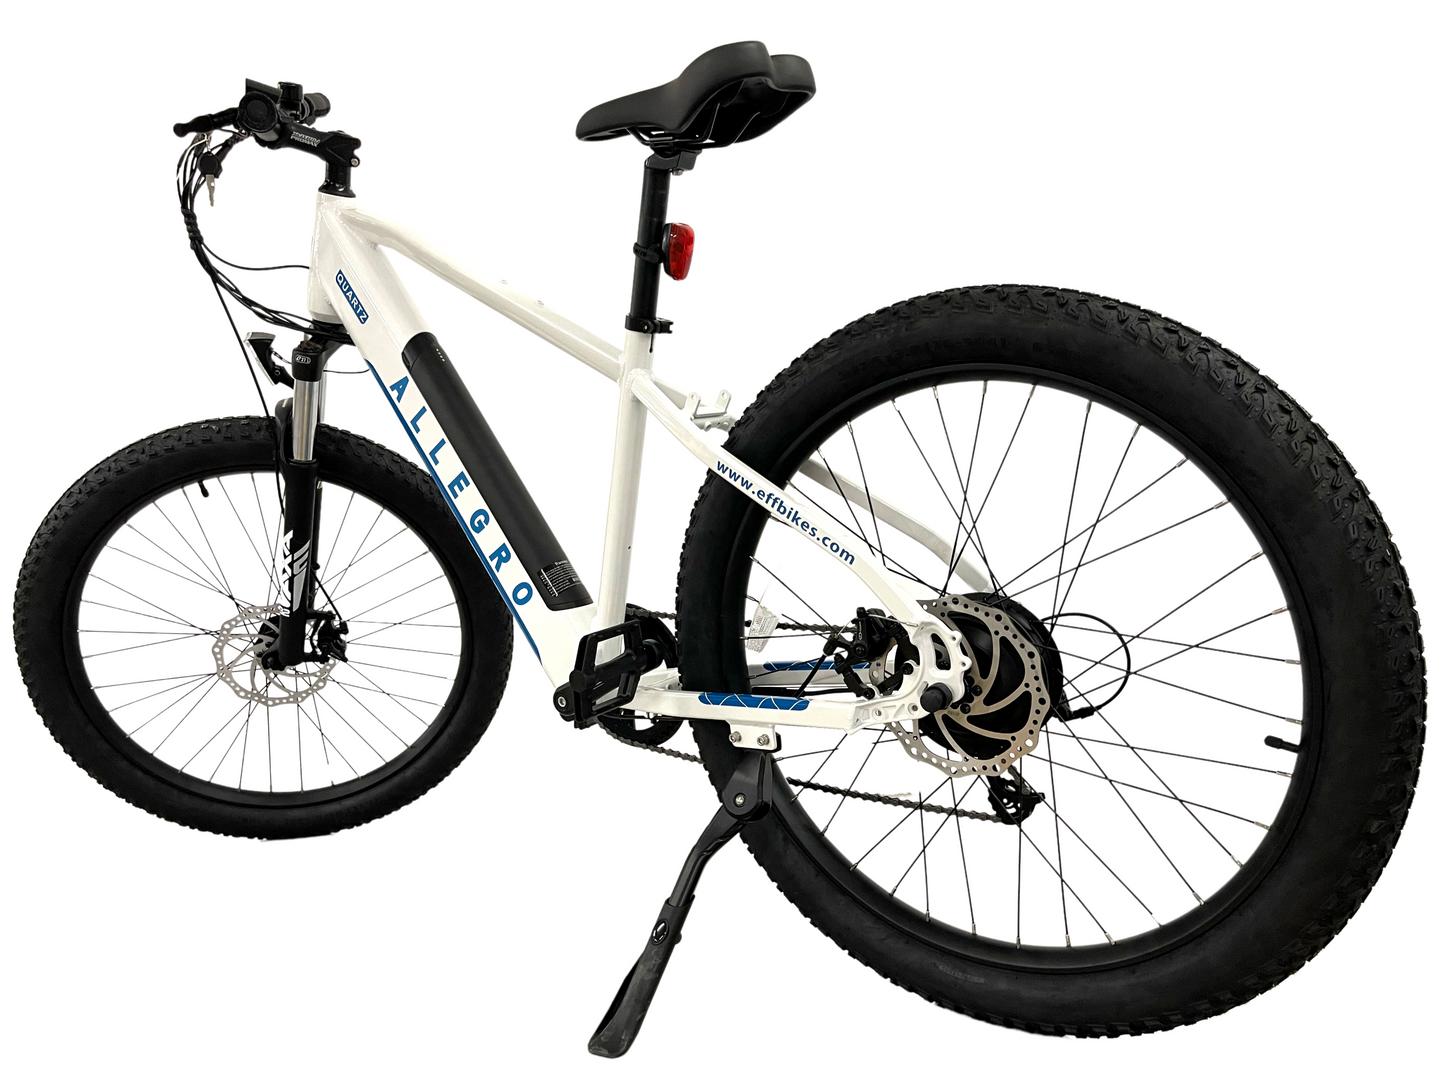 Rear angle of white Eff Bike Allegro Quartz Electric Bike showing battery placement